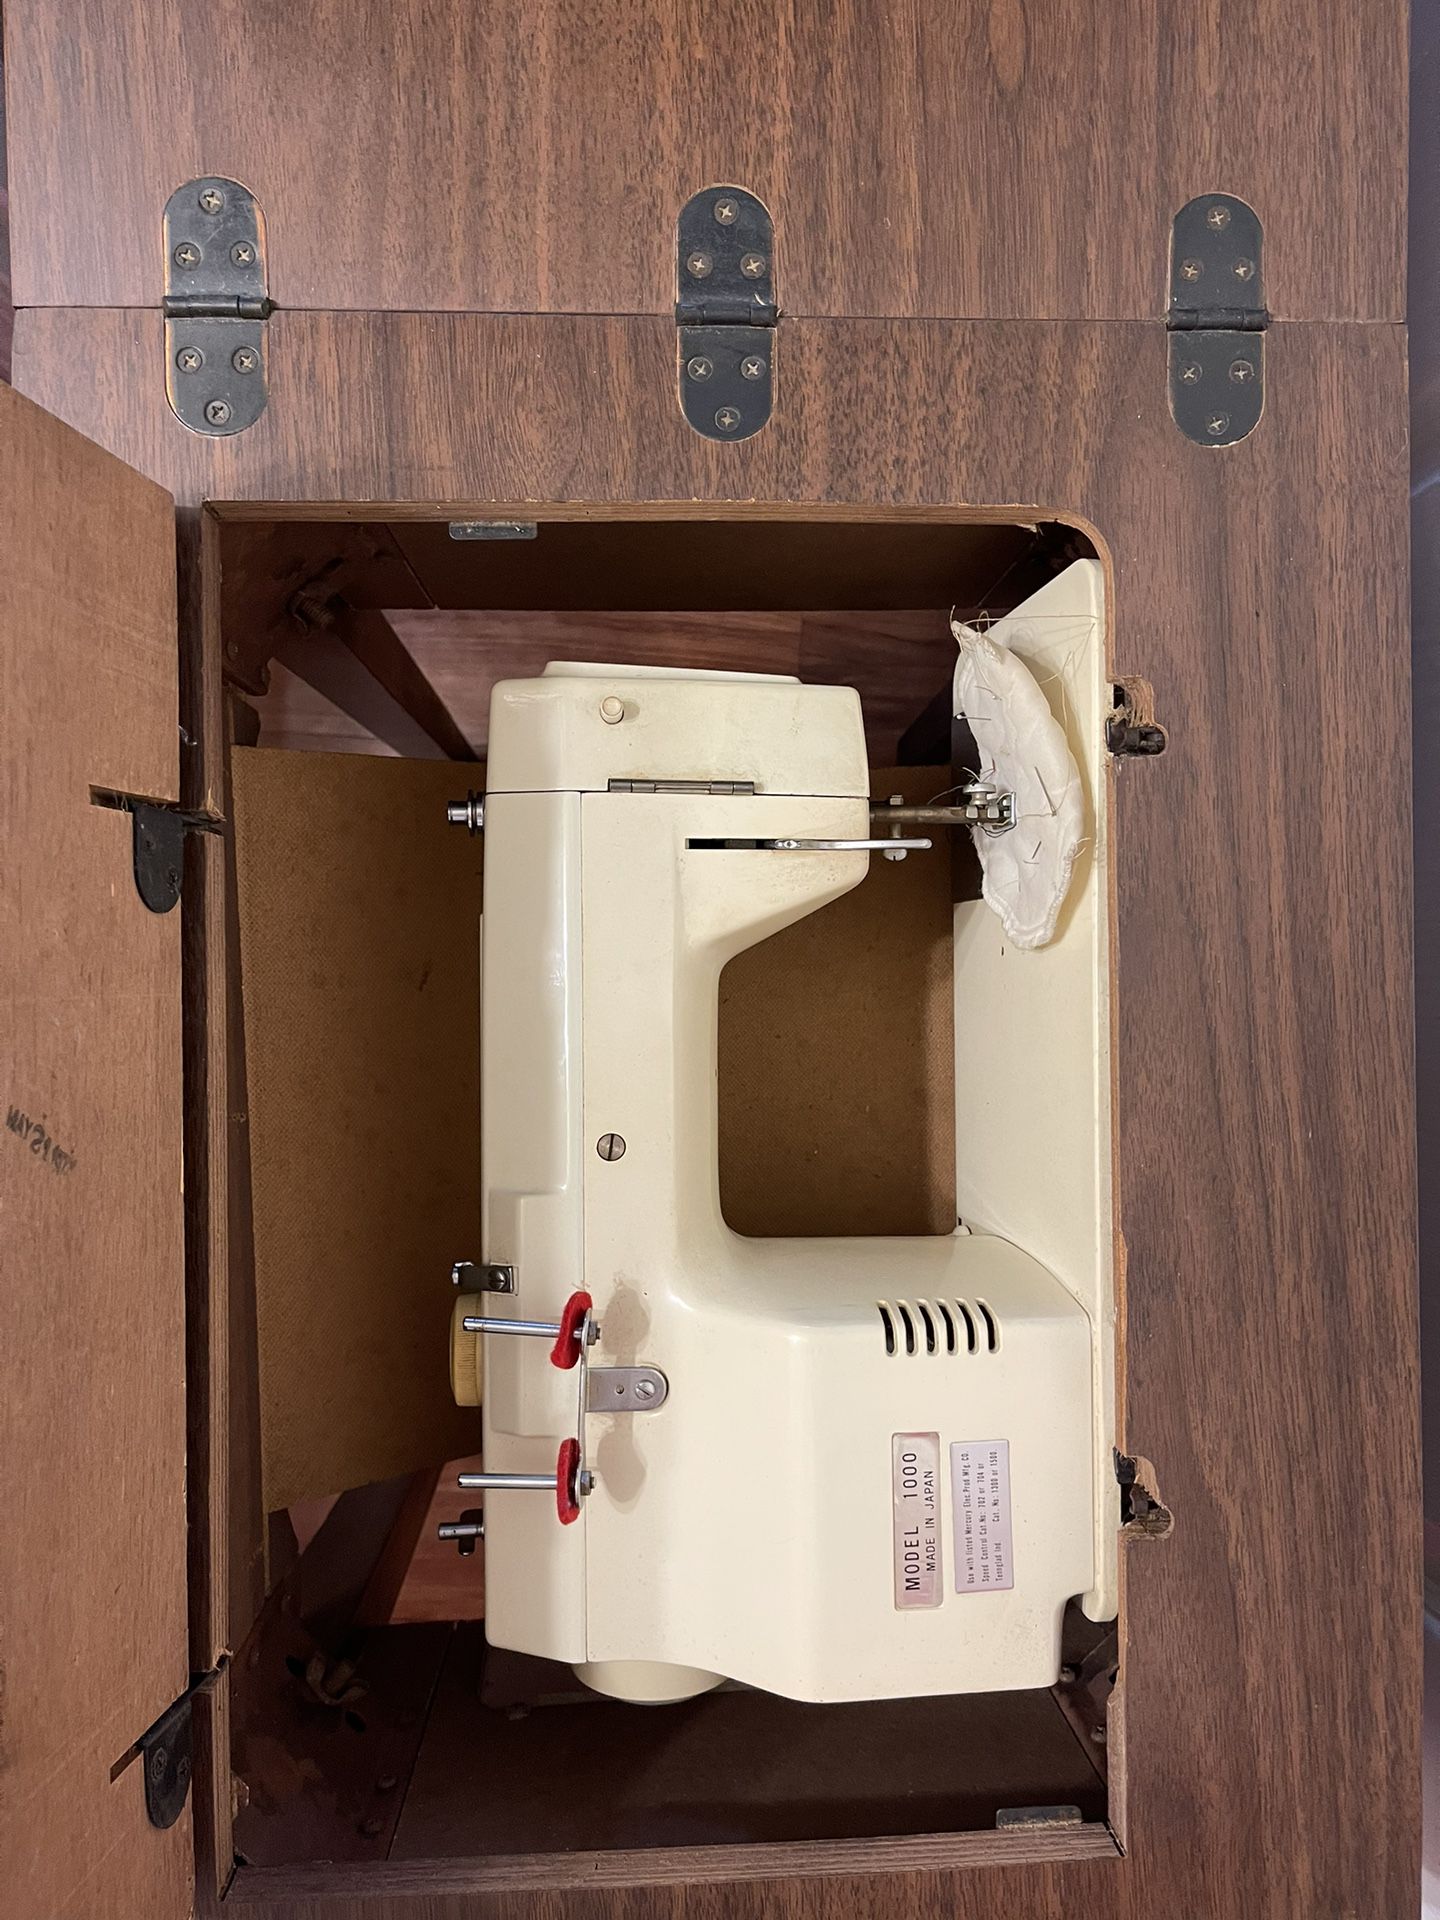 Singer Sewing And Embroidery Machine Model 1000